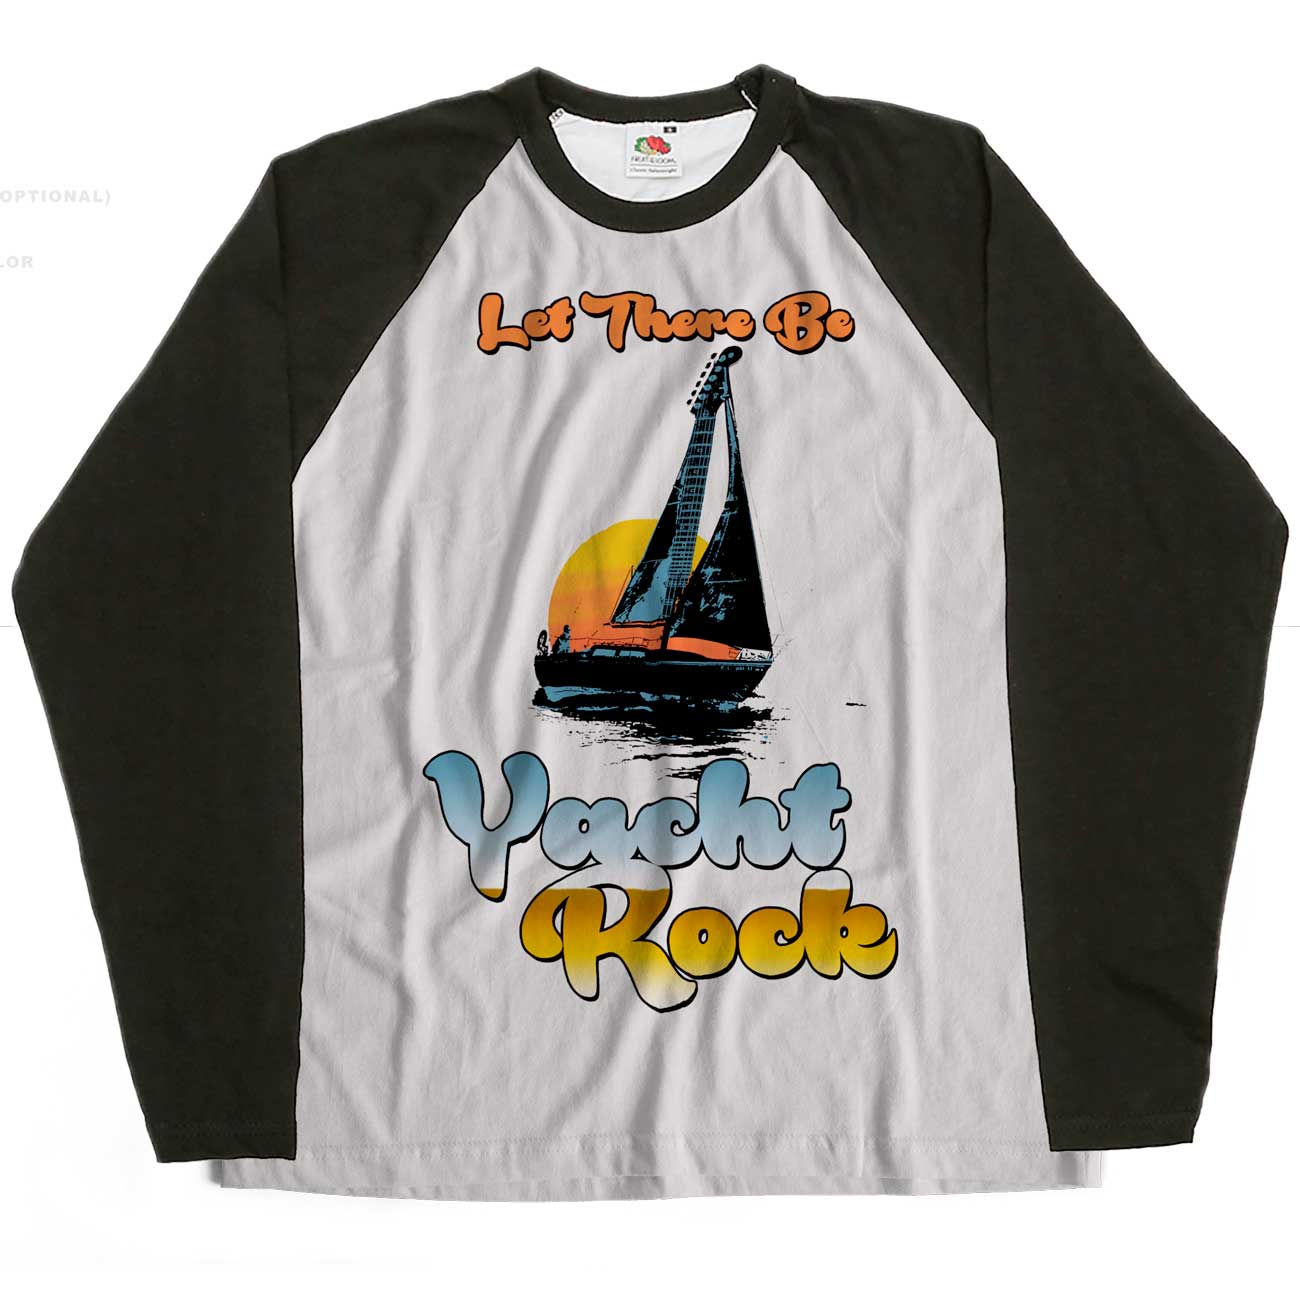 Old Skool Hooligans Let There Be Yacht Rock T Shirt - For West Coast AOR Afficionados